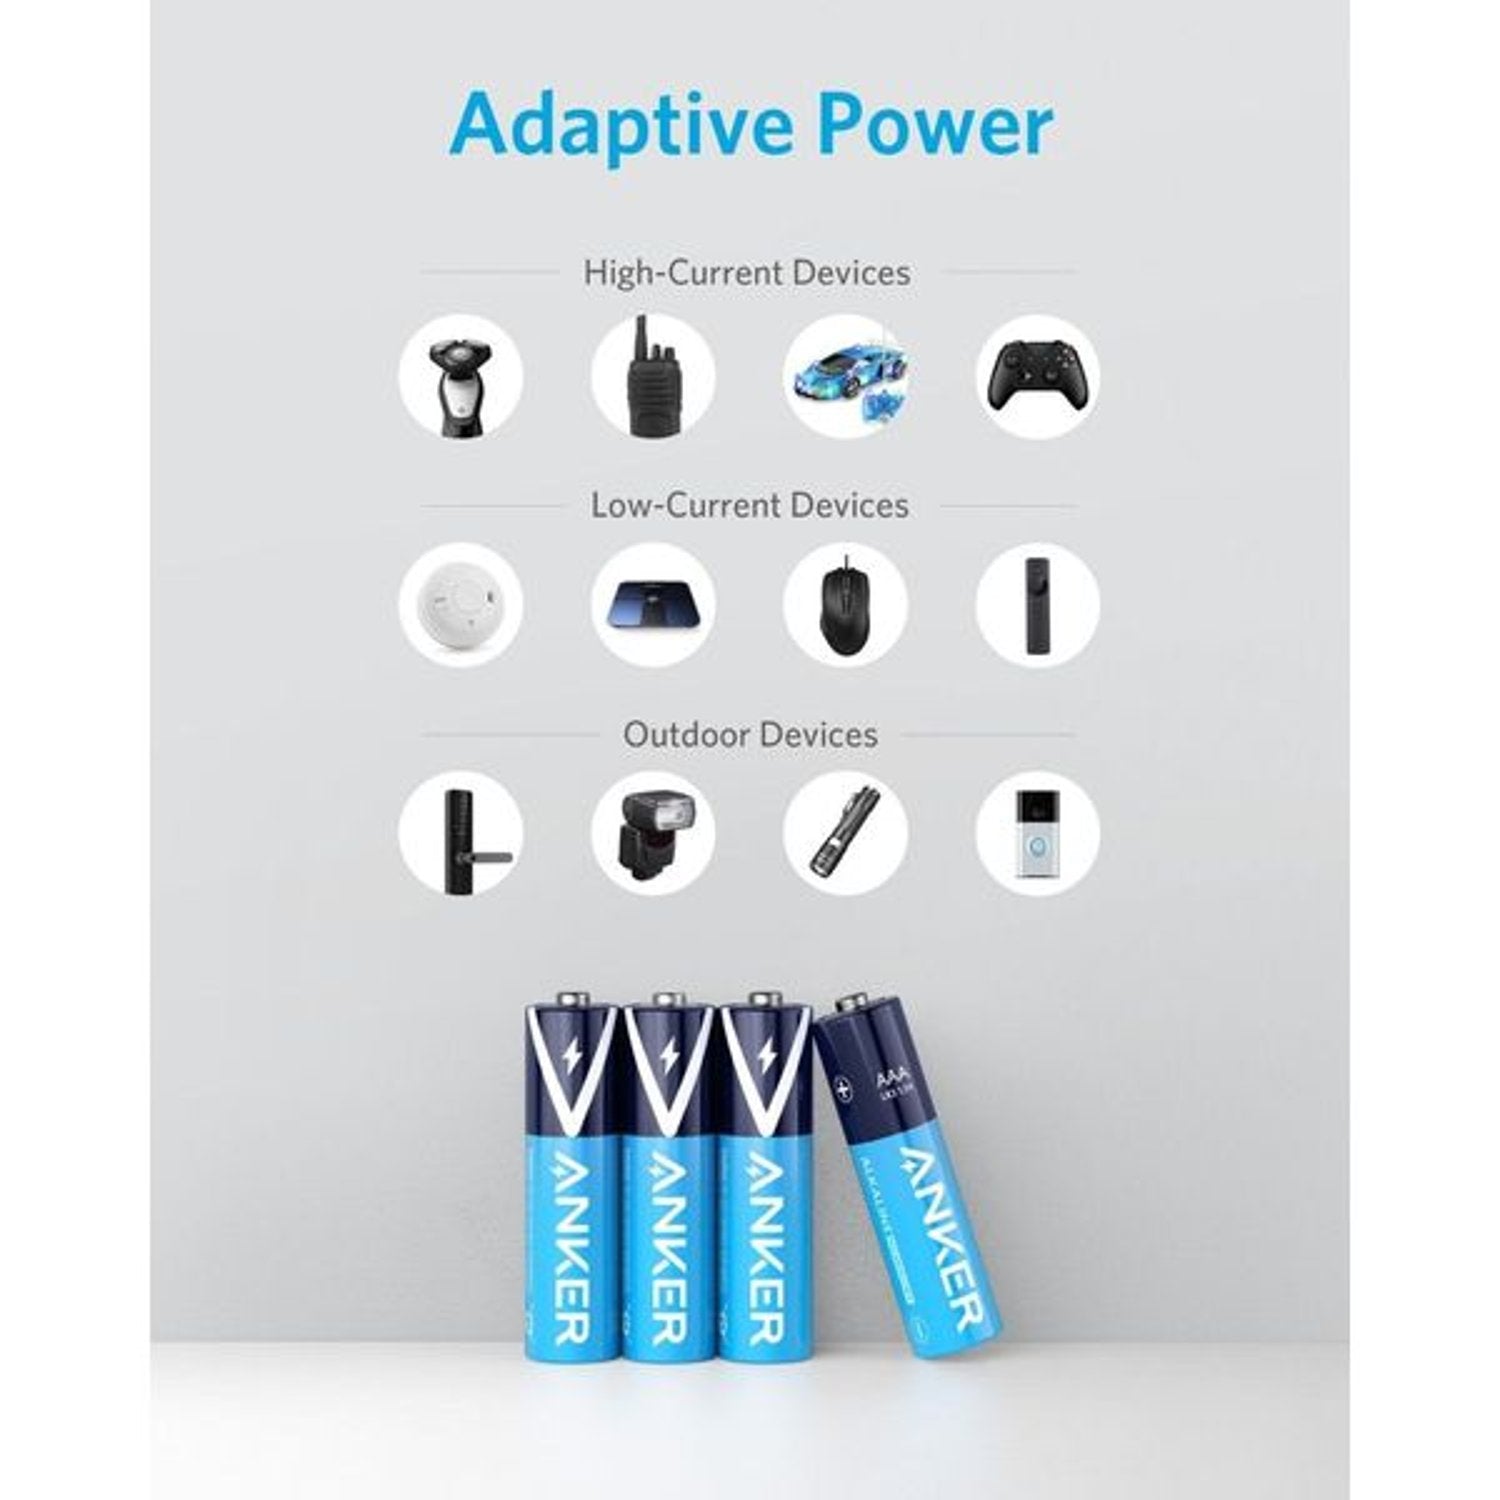 Anker AA Alkaline Batteries, 3200 Mah Long-Lasting, 1.5 Volt, Compatible With Multiple Devices, 2 Pieces | B1810H11